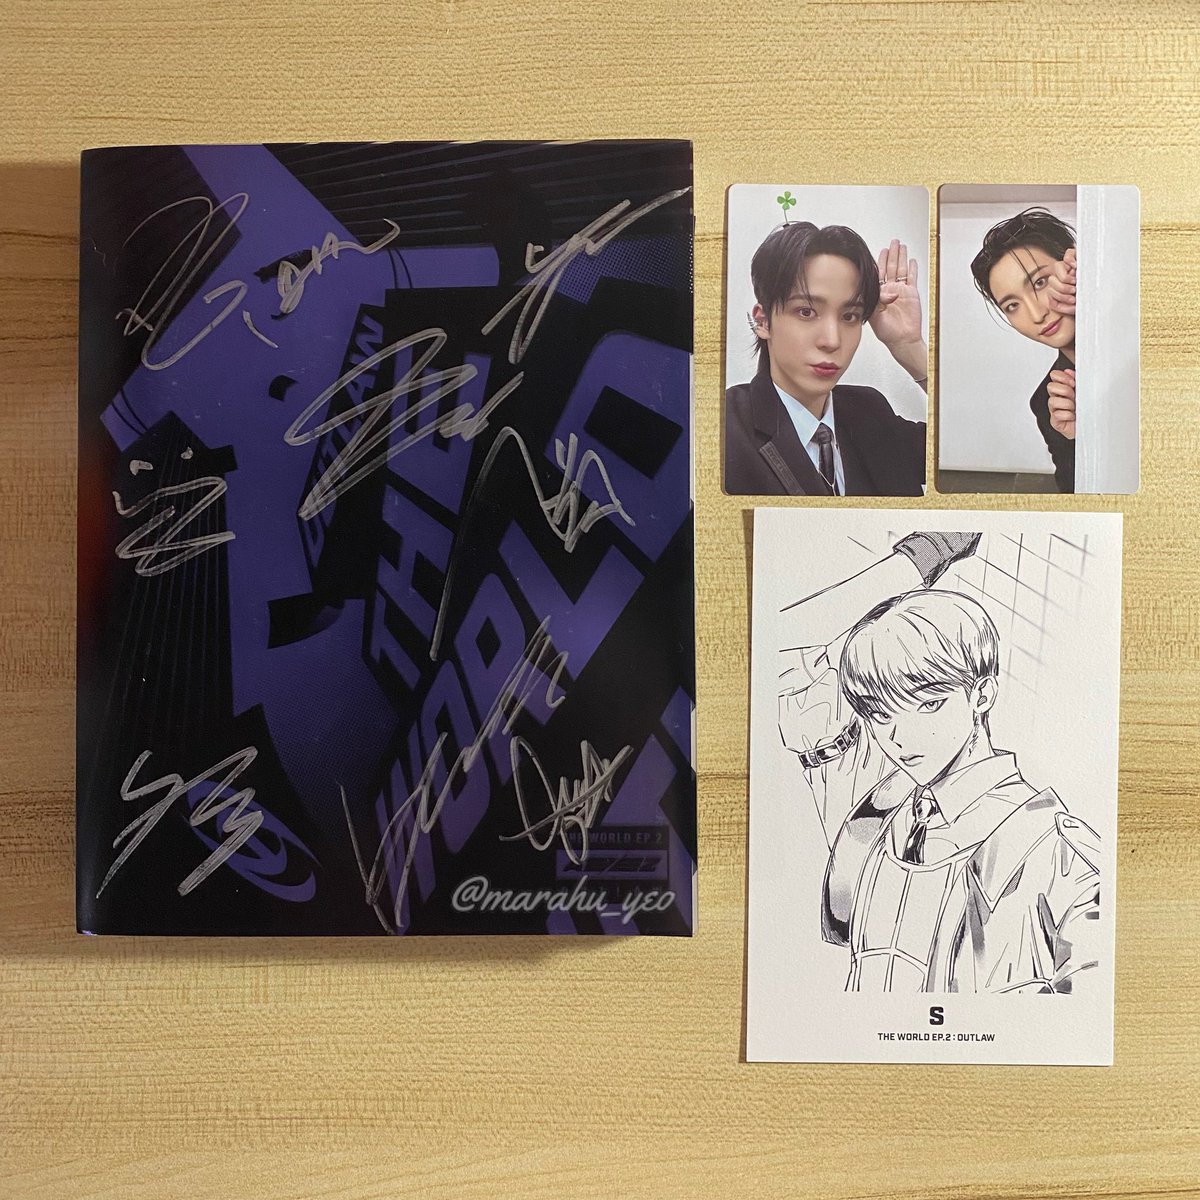 💌 mail from @ATEEZ_SEA i already received one of my greatest prizes ever 😭 thank you so much once again for the opportunity to win this treasure 🥹💗 still reeling from the feeling of getting to touch an ot8-signed outlaw album!! now how do i store this AAAAAAAA (ಥ﹏ಥ)